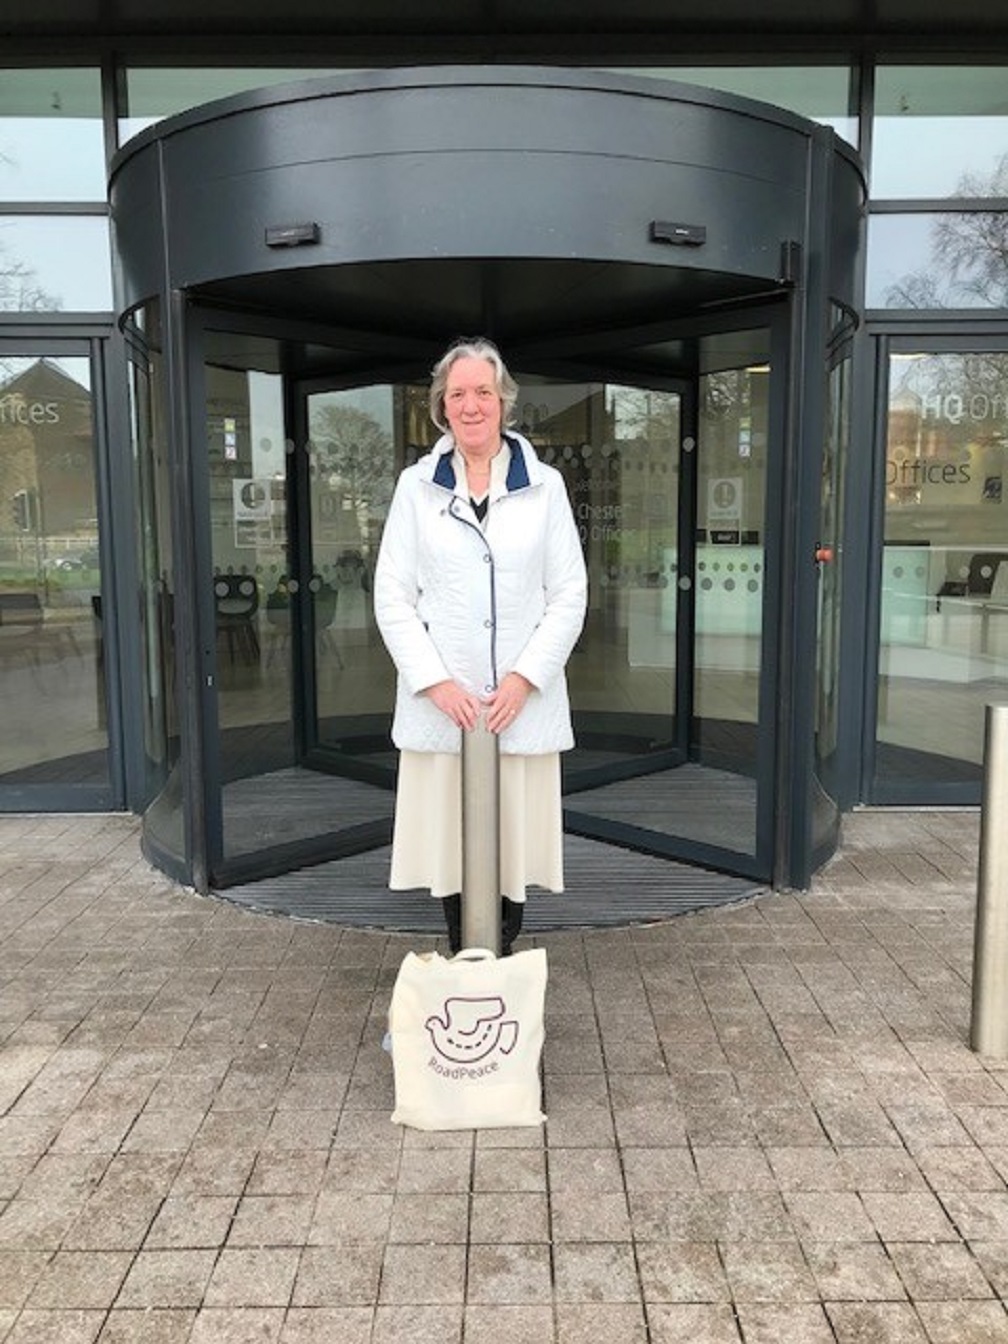 Pauline Fielding outside the HQ building in Chester after hearing that the scheme to improve the A540 would be approved by council.